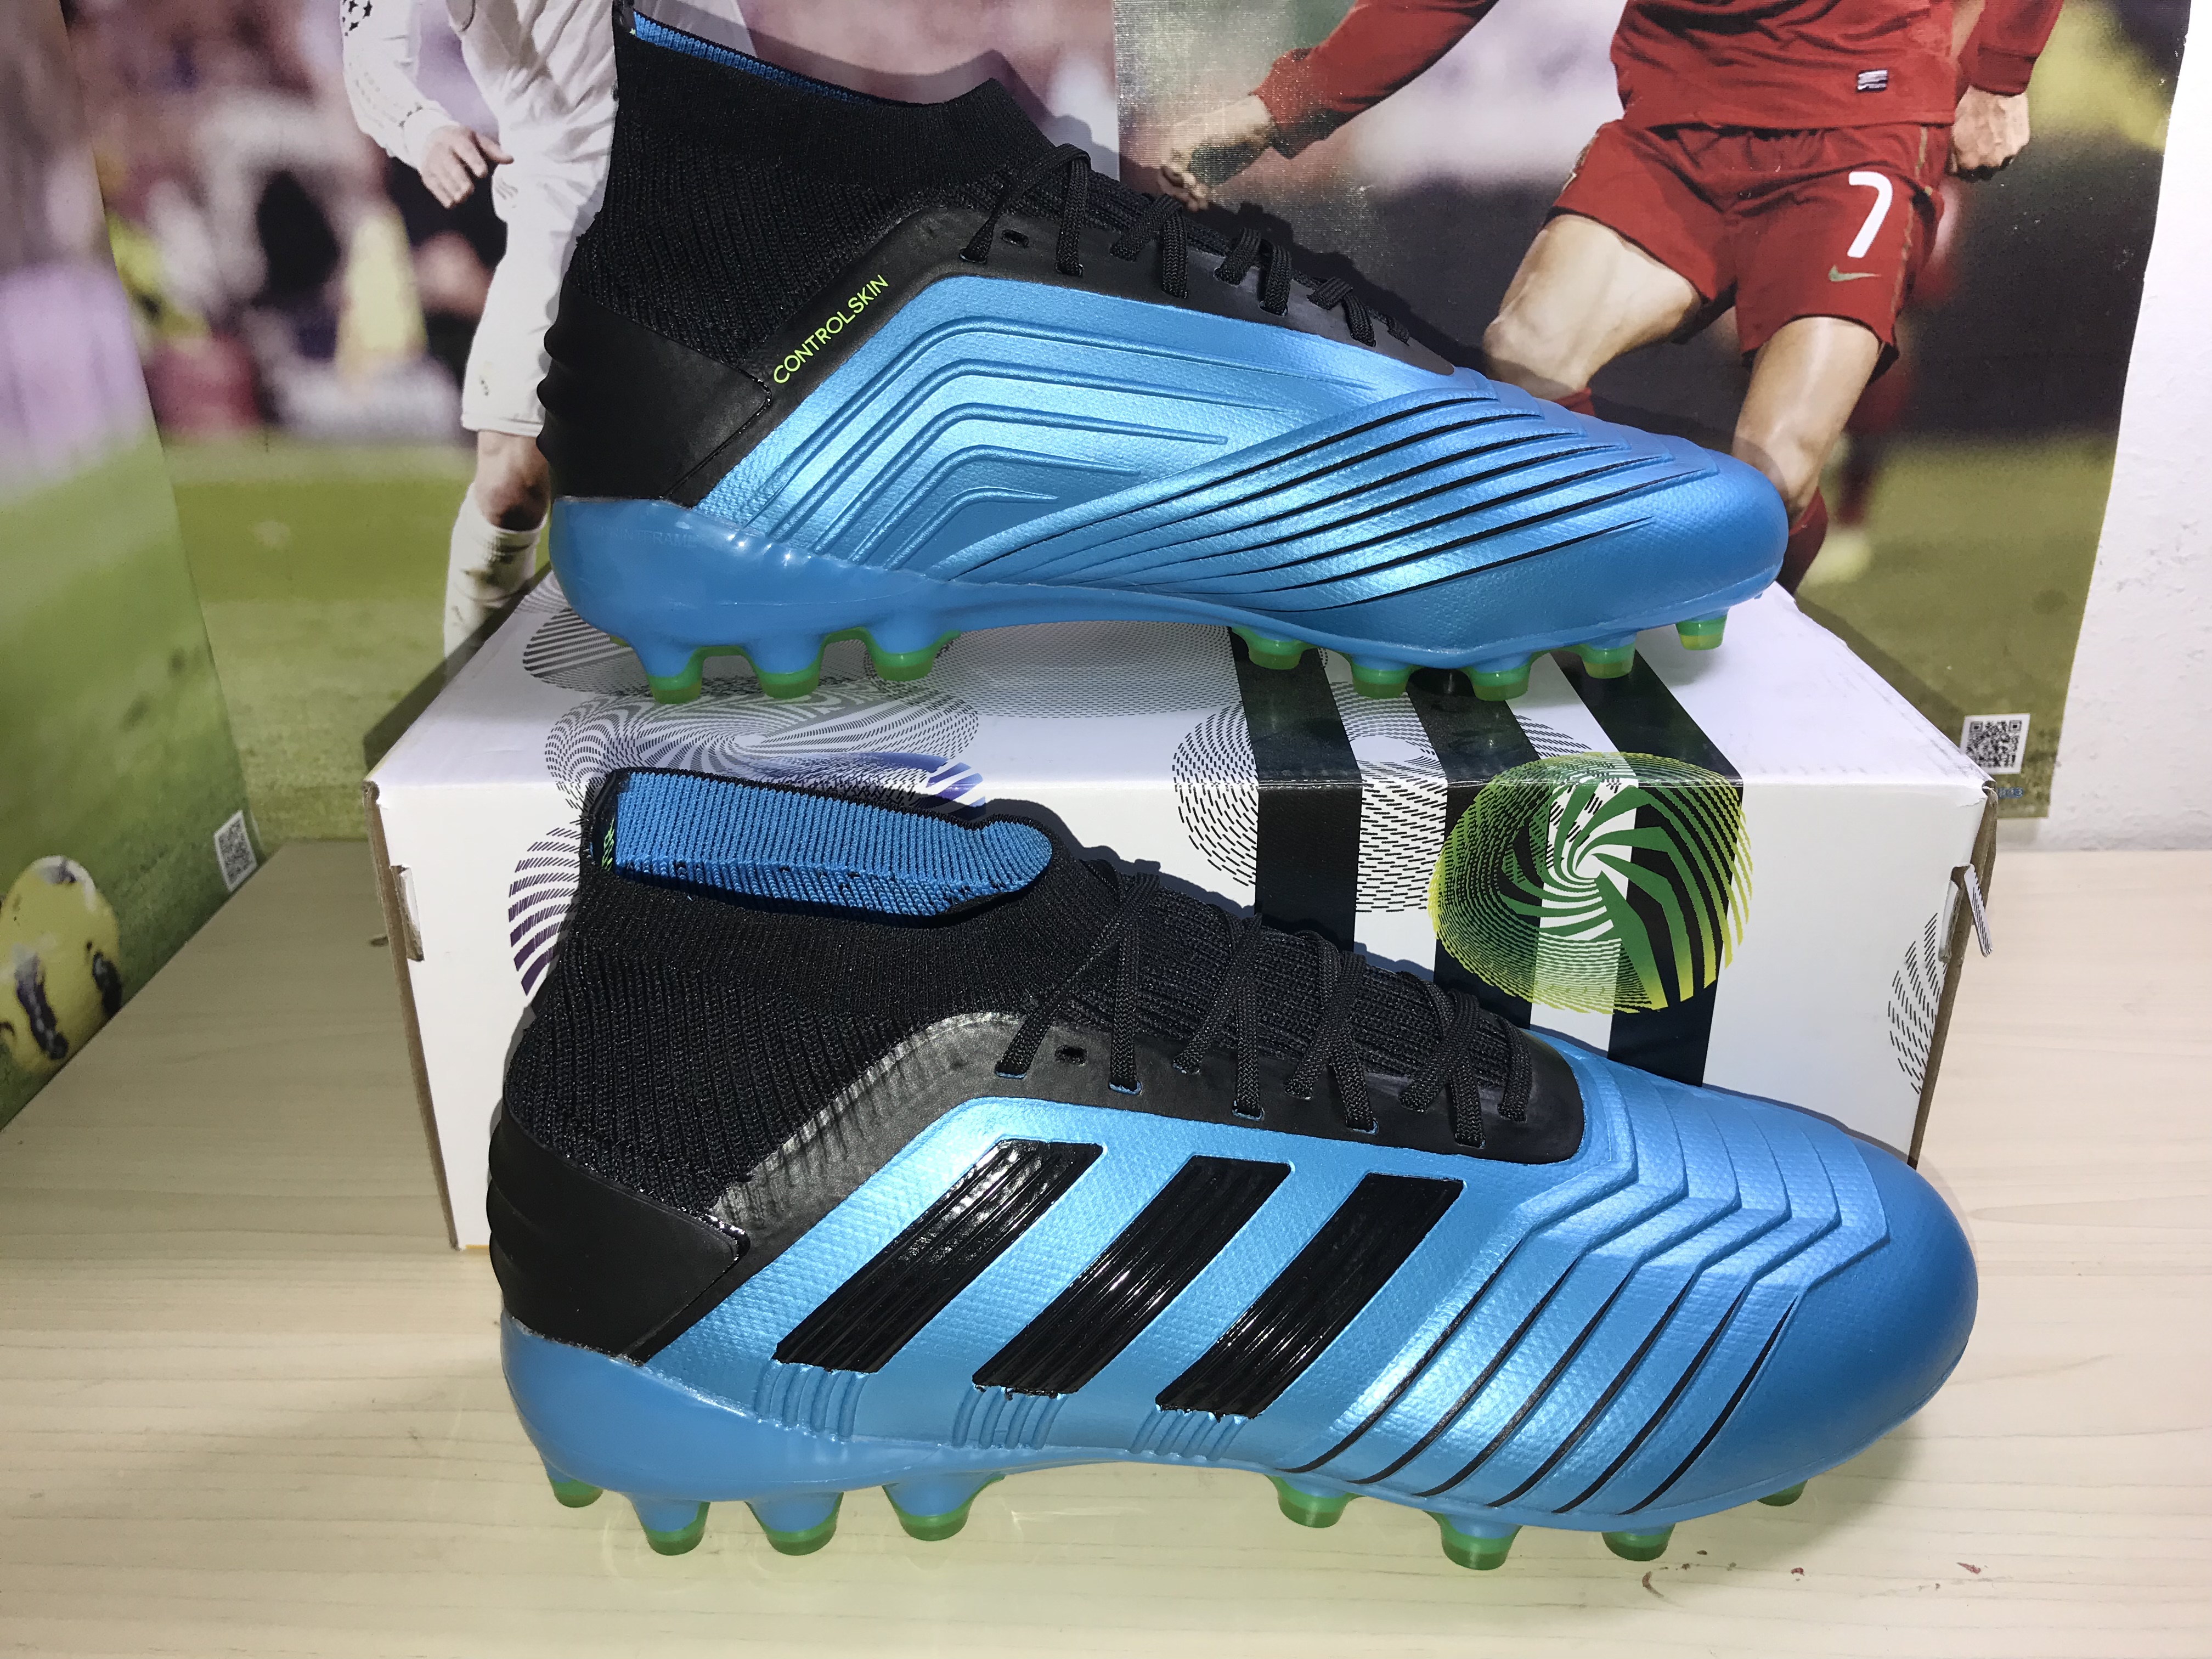 Adidas Predator 19.1 AG 'Blue Black' F99970 - Superior Traction for Dominant Play